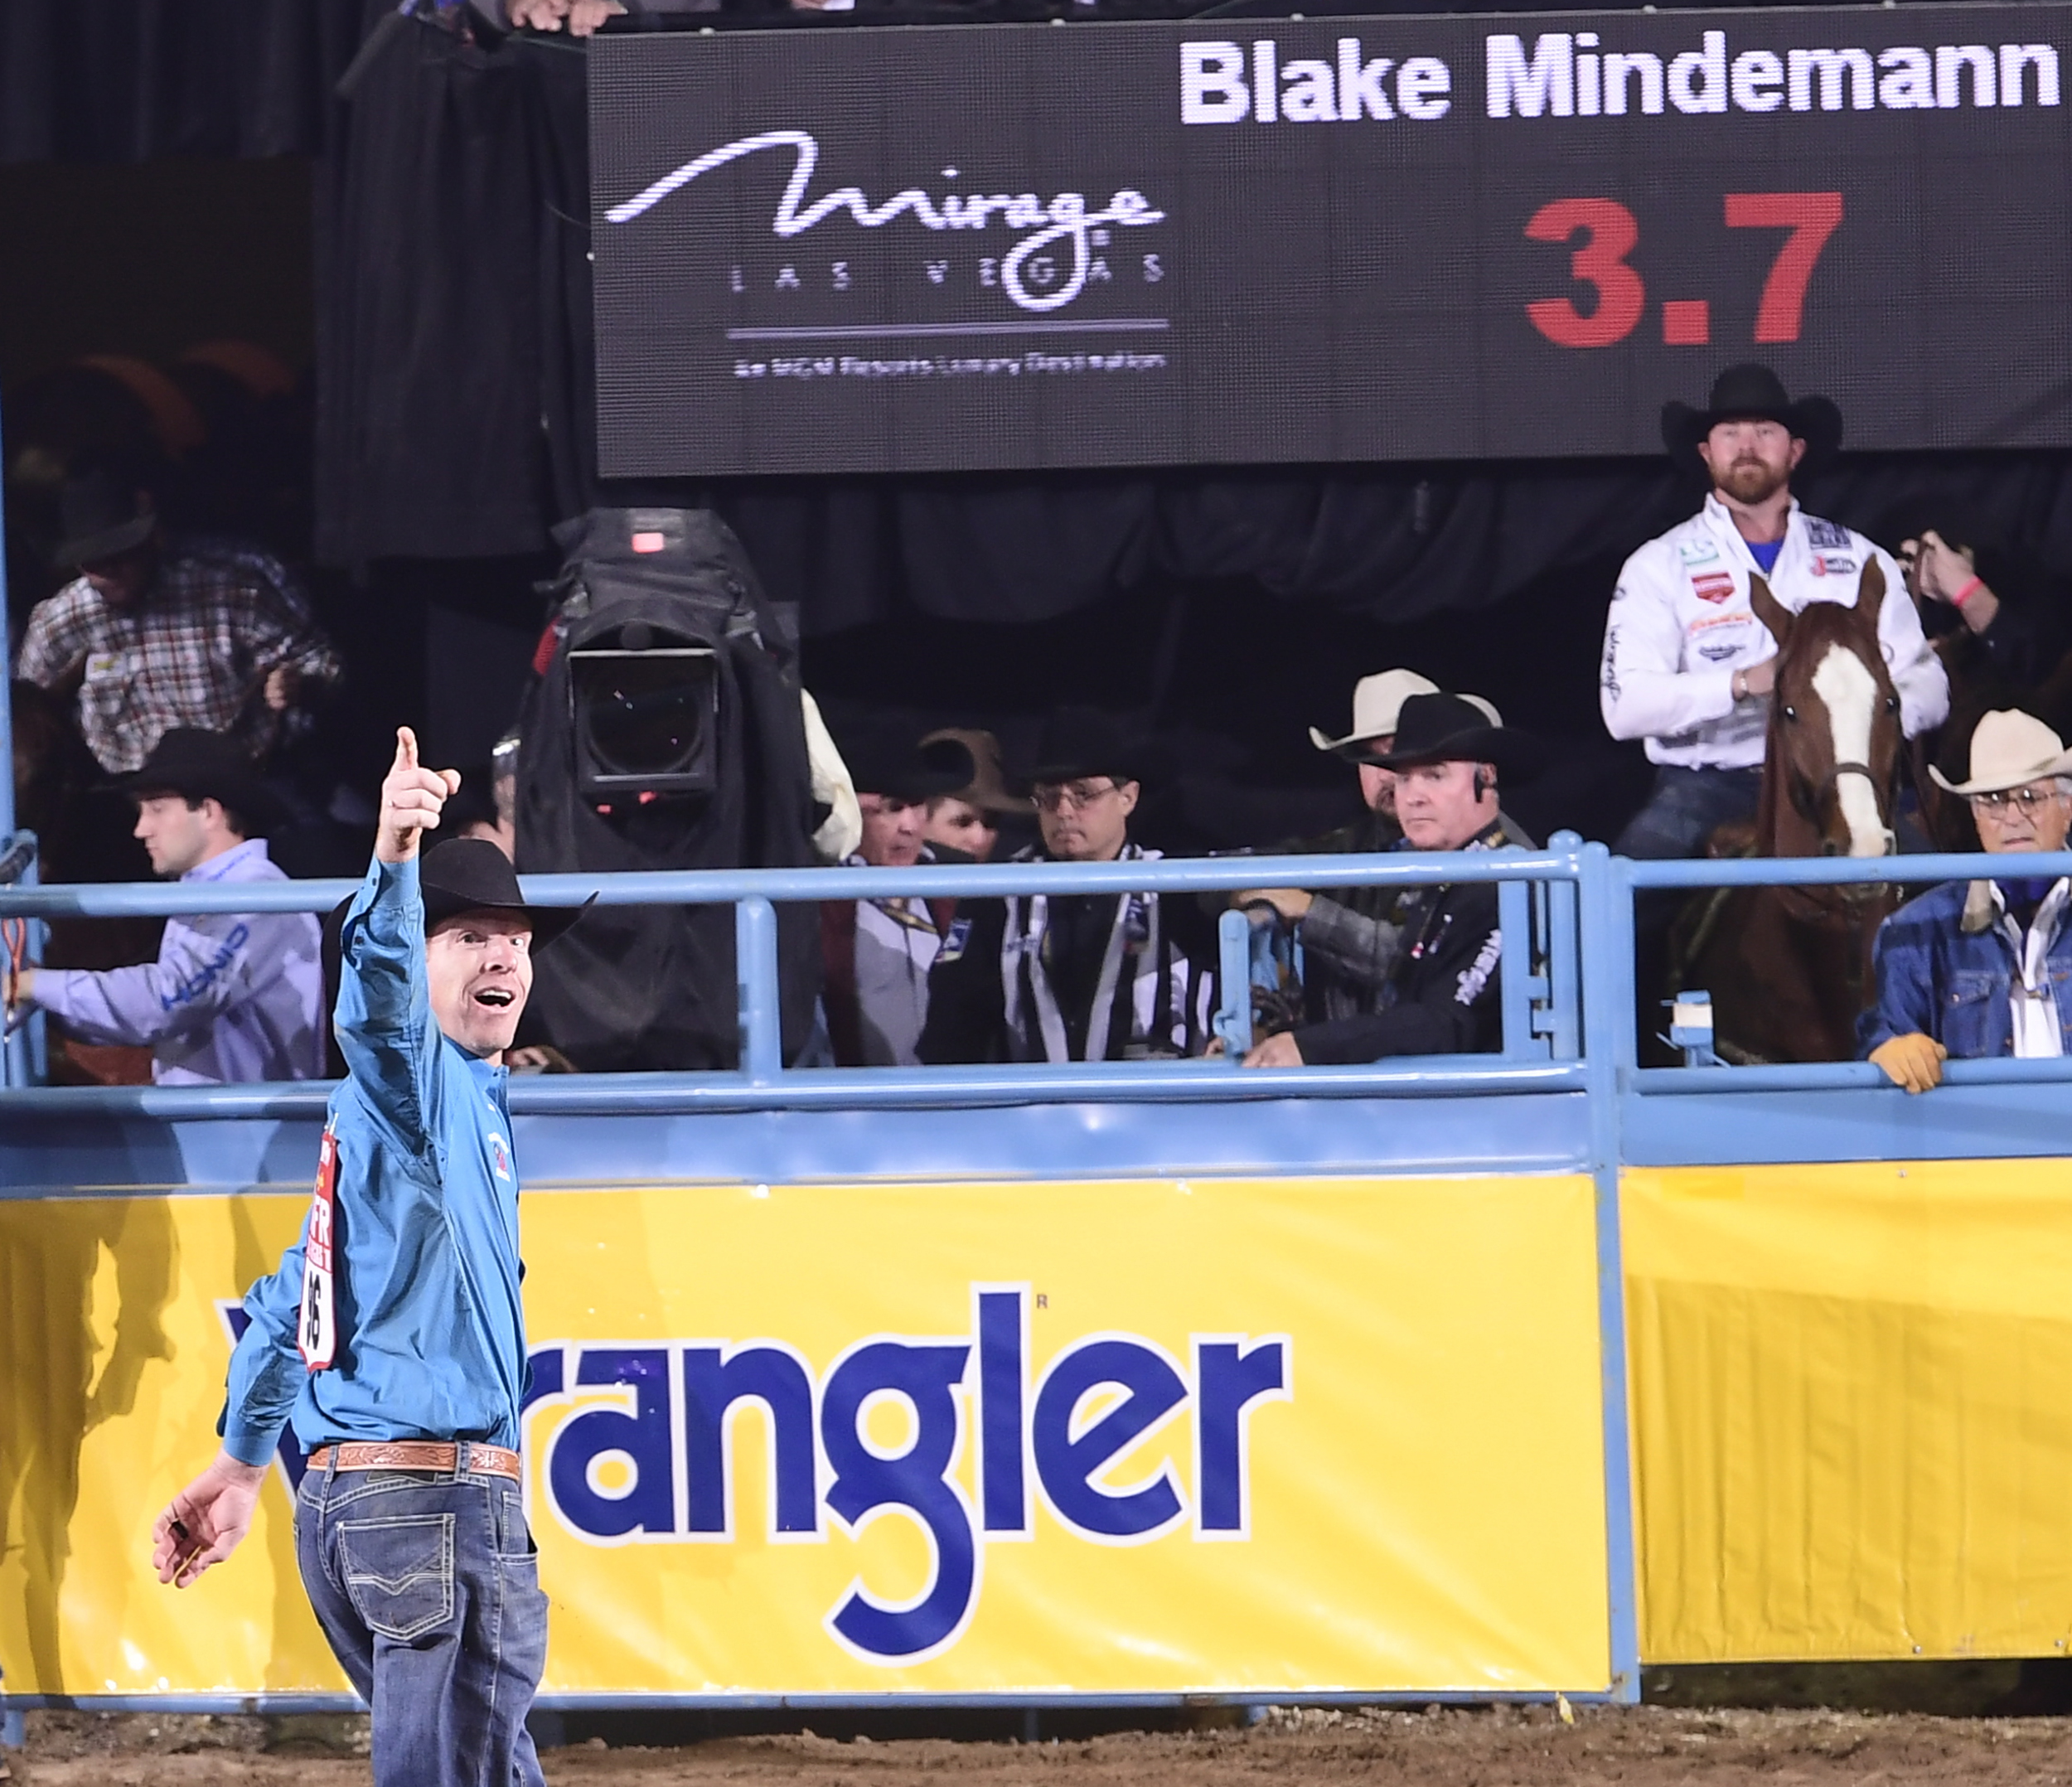 Steer wrestler Blake Mindemann celebrates his 3.7-second run Friday to finish as the runner-up in the ninth round of the National Finals Rodeo. (PRCA PRORODEO PHOTO BY JAMES PHIFER)